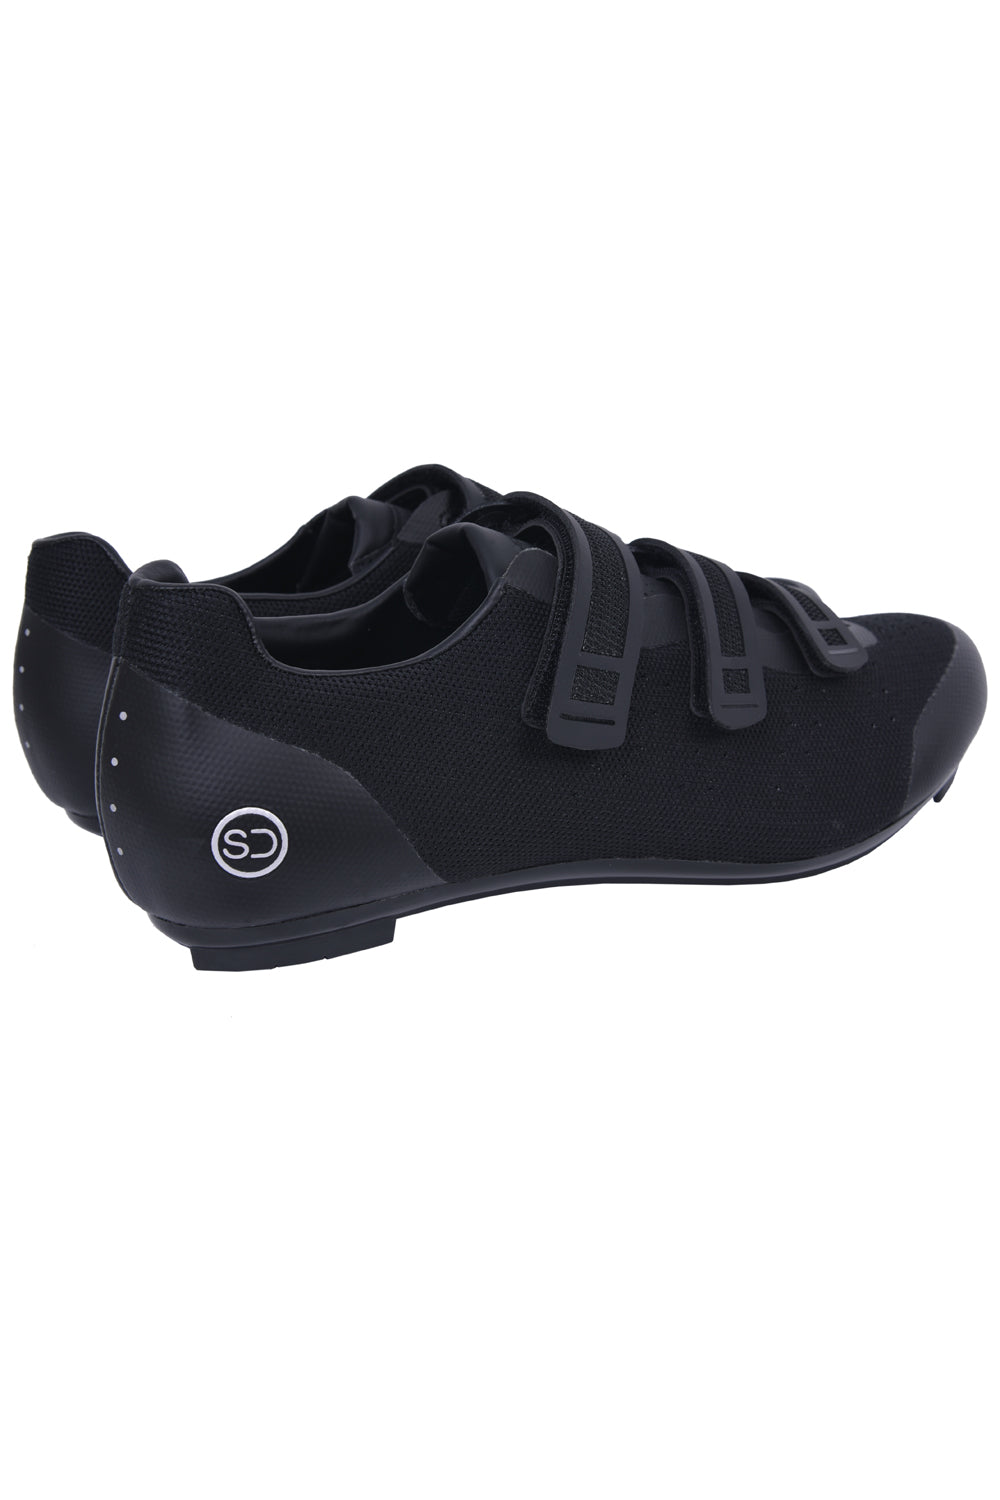 Sundried S-GT4 Knit Road Cycle Shoes Cycle Shoes Activewear